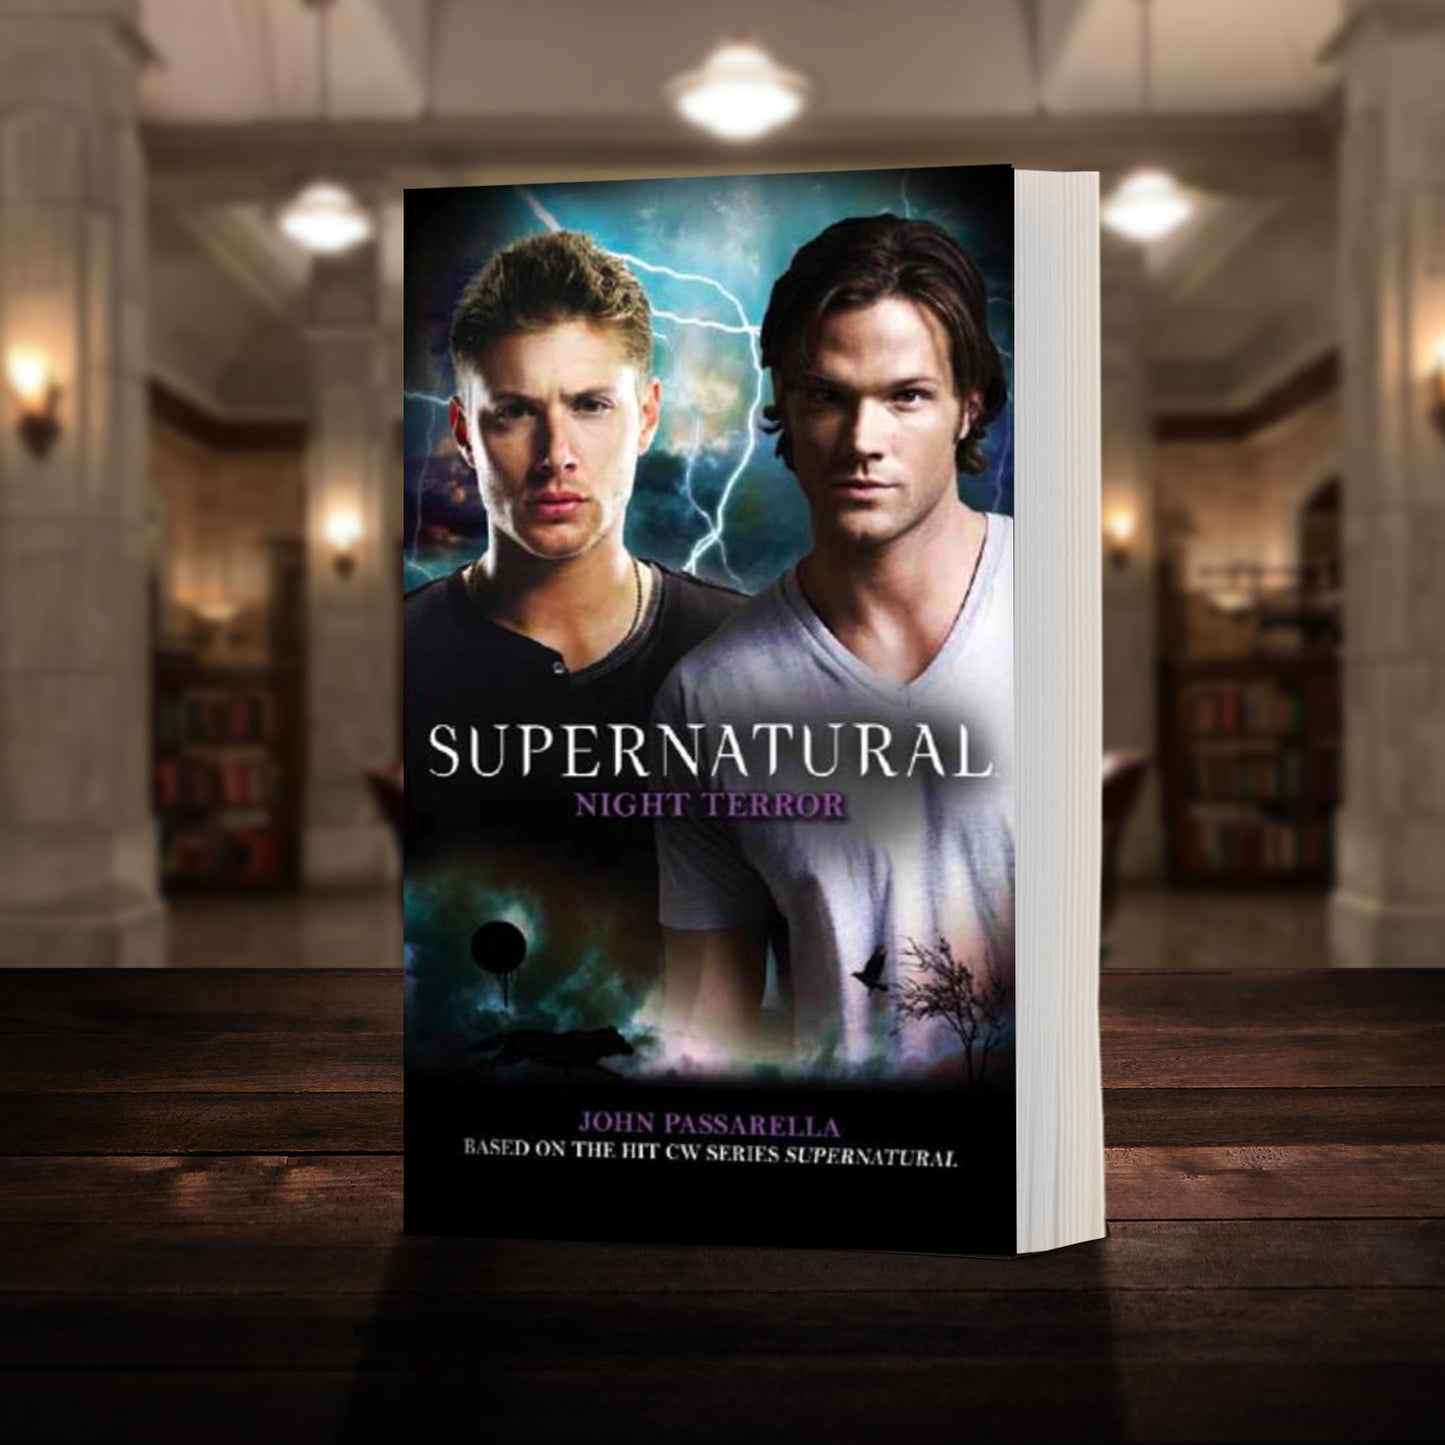 A copy of the book "Supernatural: Night Terror" pictured in the "bunker" from Supernatural. The cover shows early-season Sam and Dean Winchester and reads "Supernatural Night Terror - Based on the hit CW series SUPERNATURAL by John Passaella”